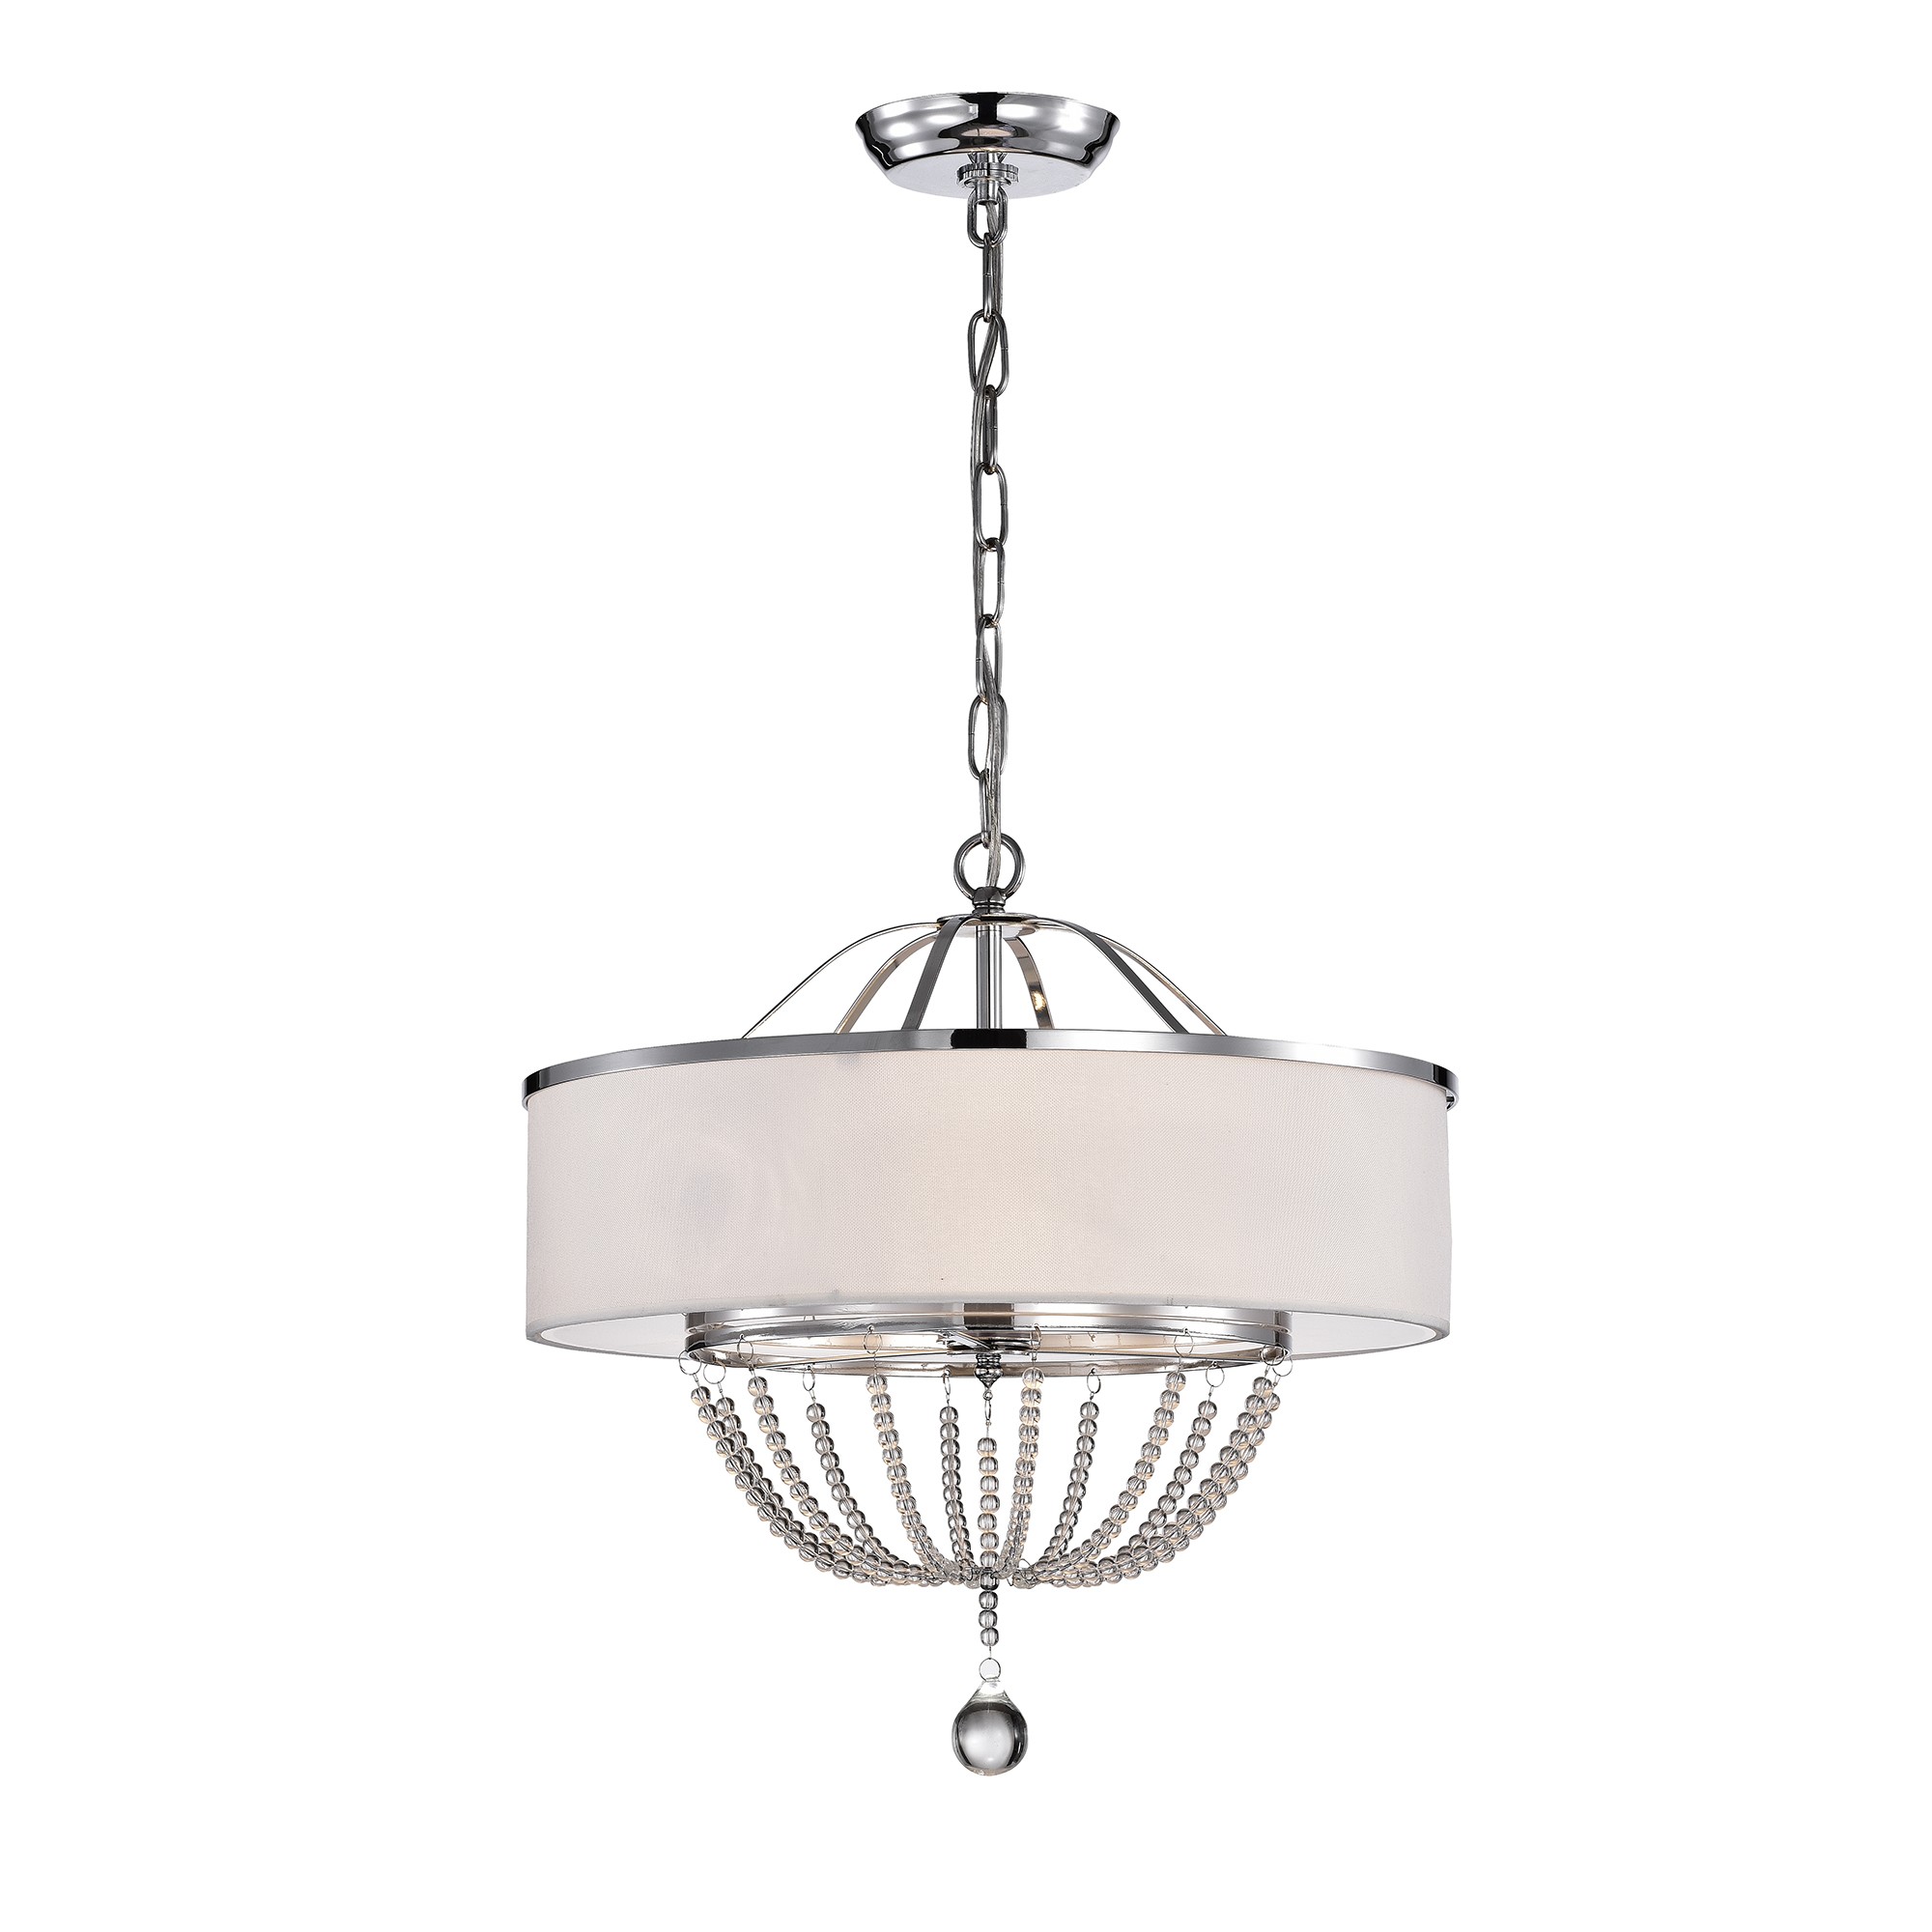 Deanna 3-light 18-inch White Fabric with Chrome & Crystal Pendant Lamp